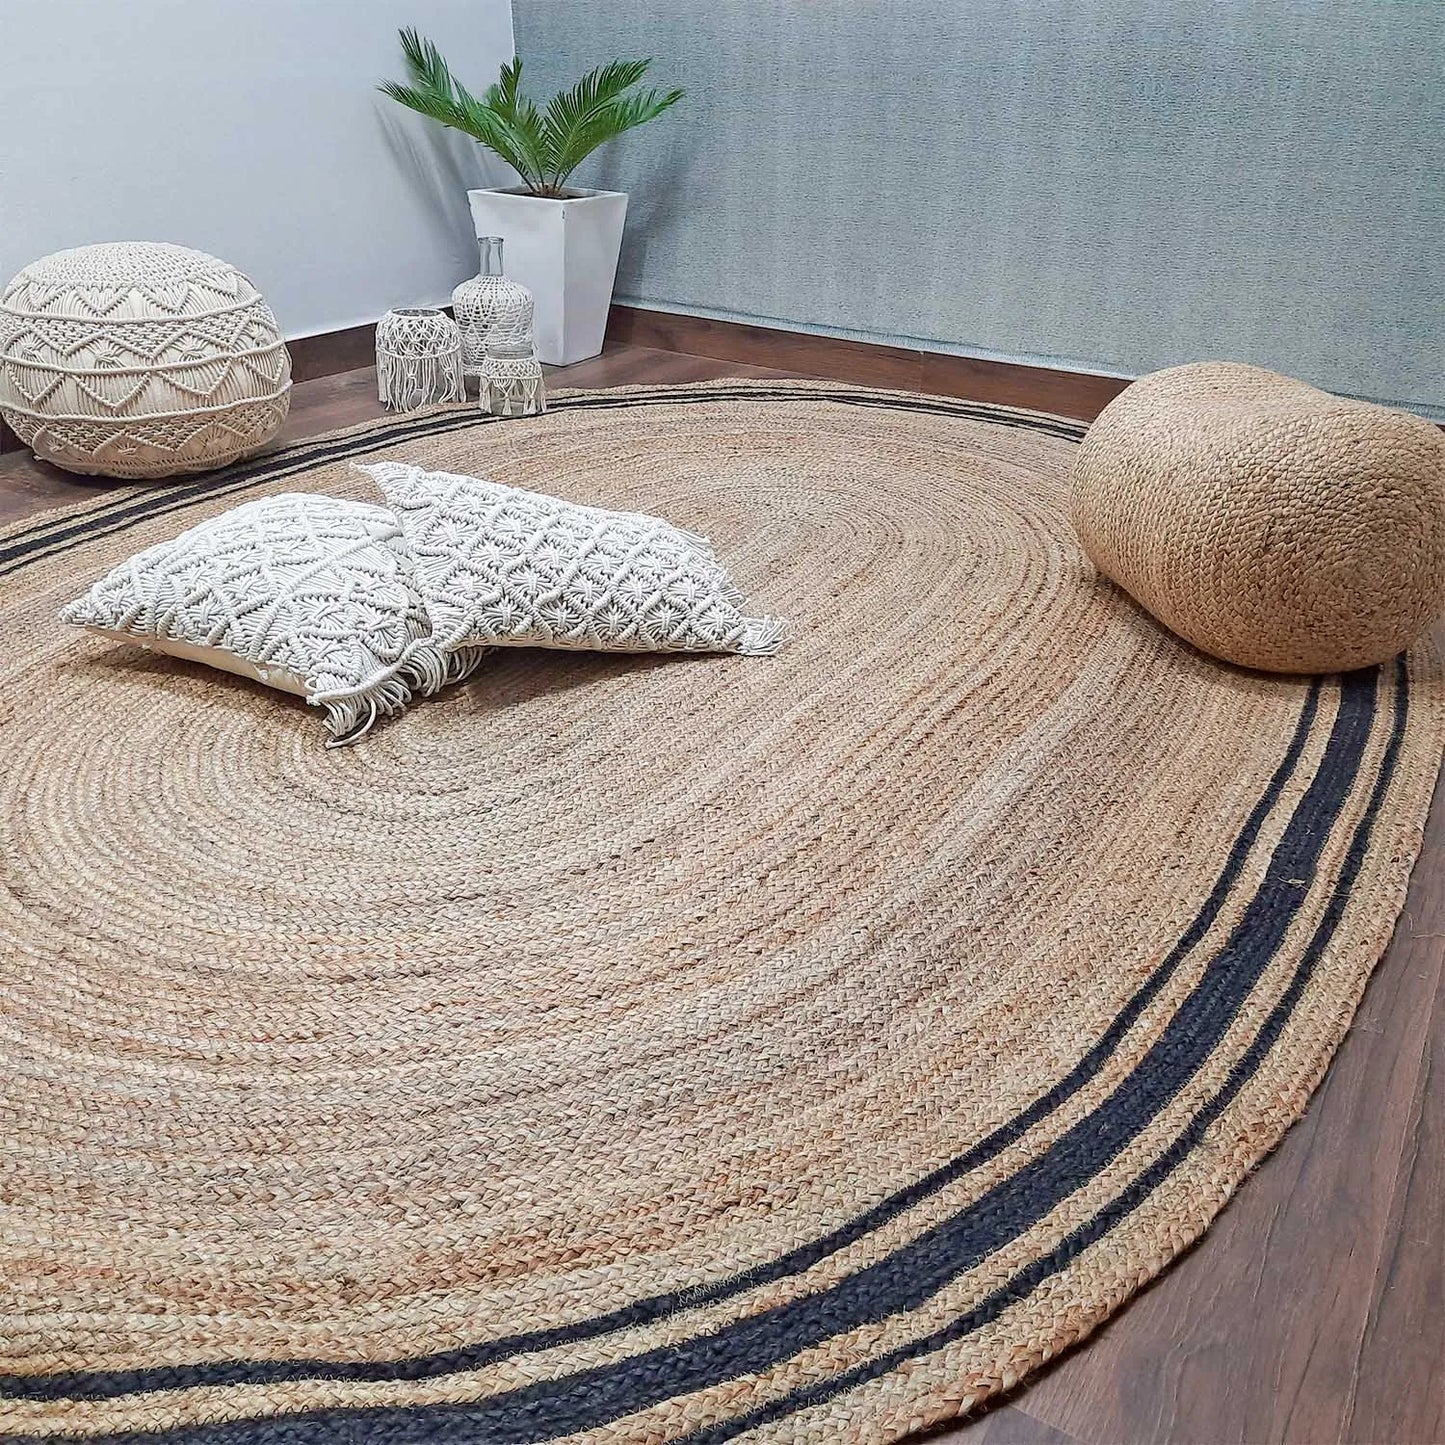 Avioni Home Eco Collection – Handwoven Braided Jute Oval Carpet with Black Border Stripes– Handmade and All Natural Rug – Oval